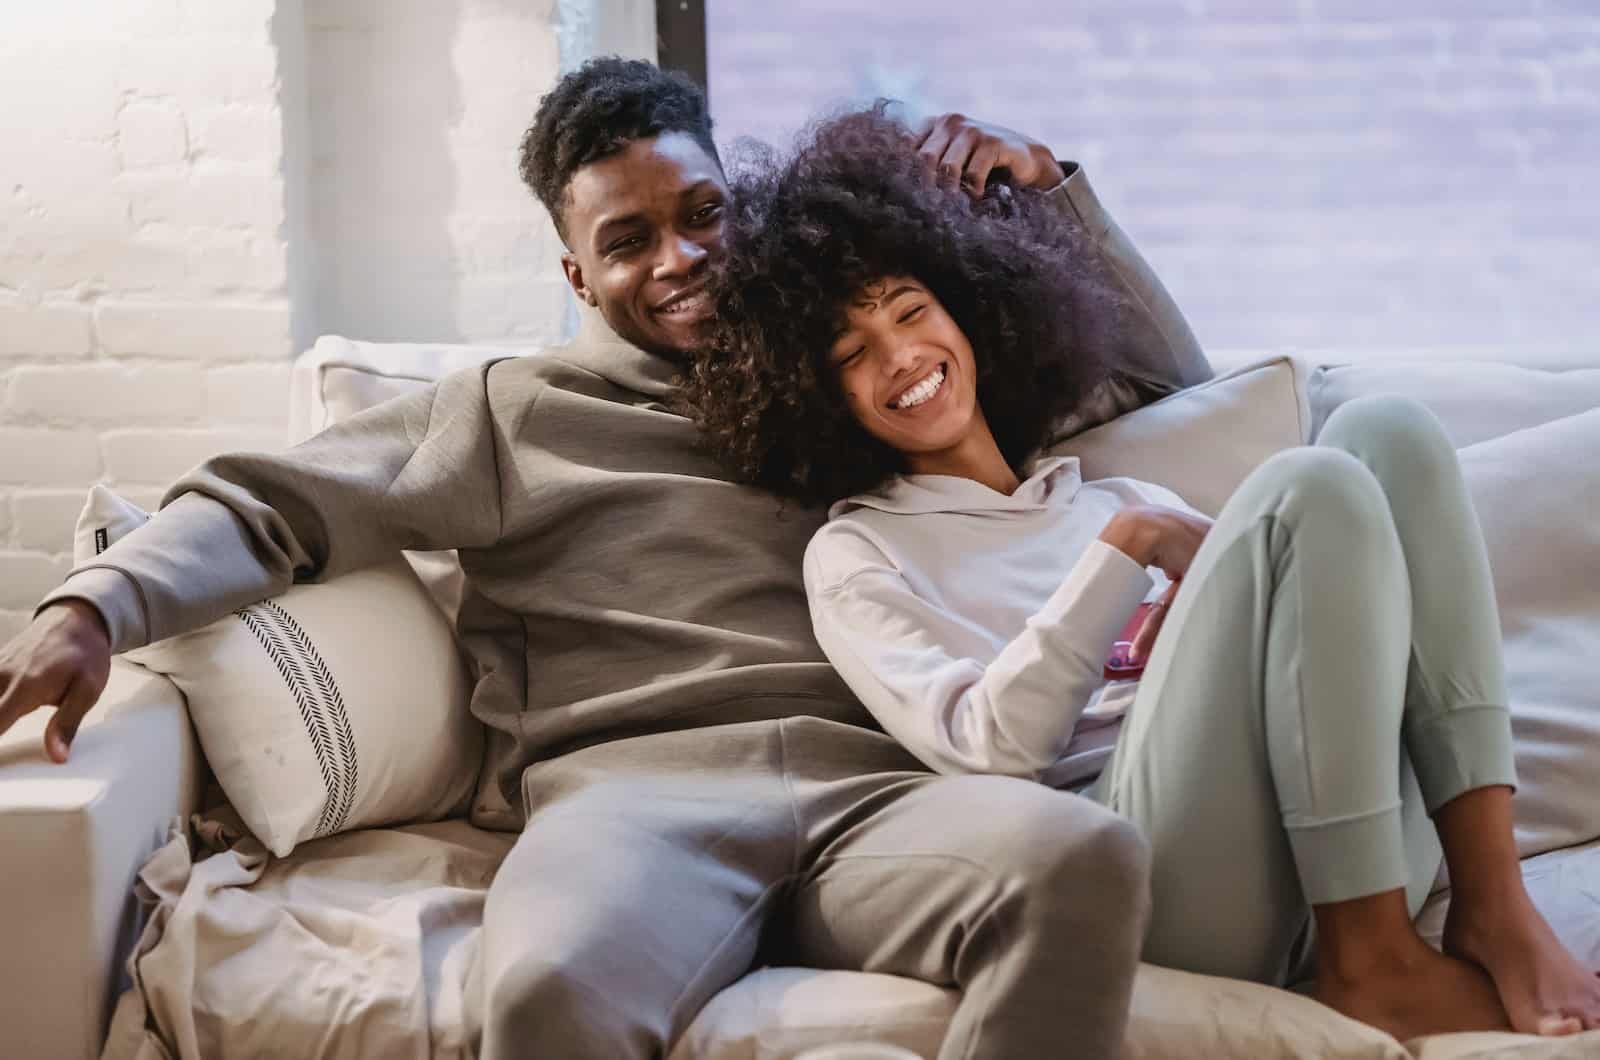 woman and man snuggling on a couch and celebrating their bond